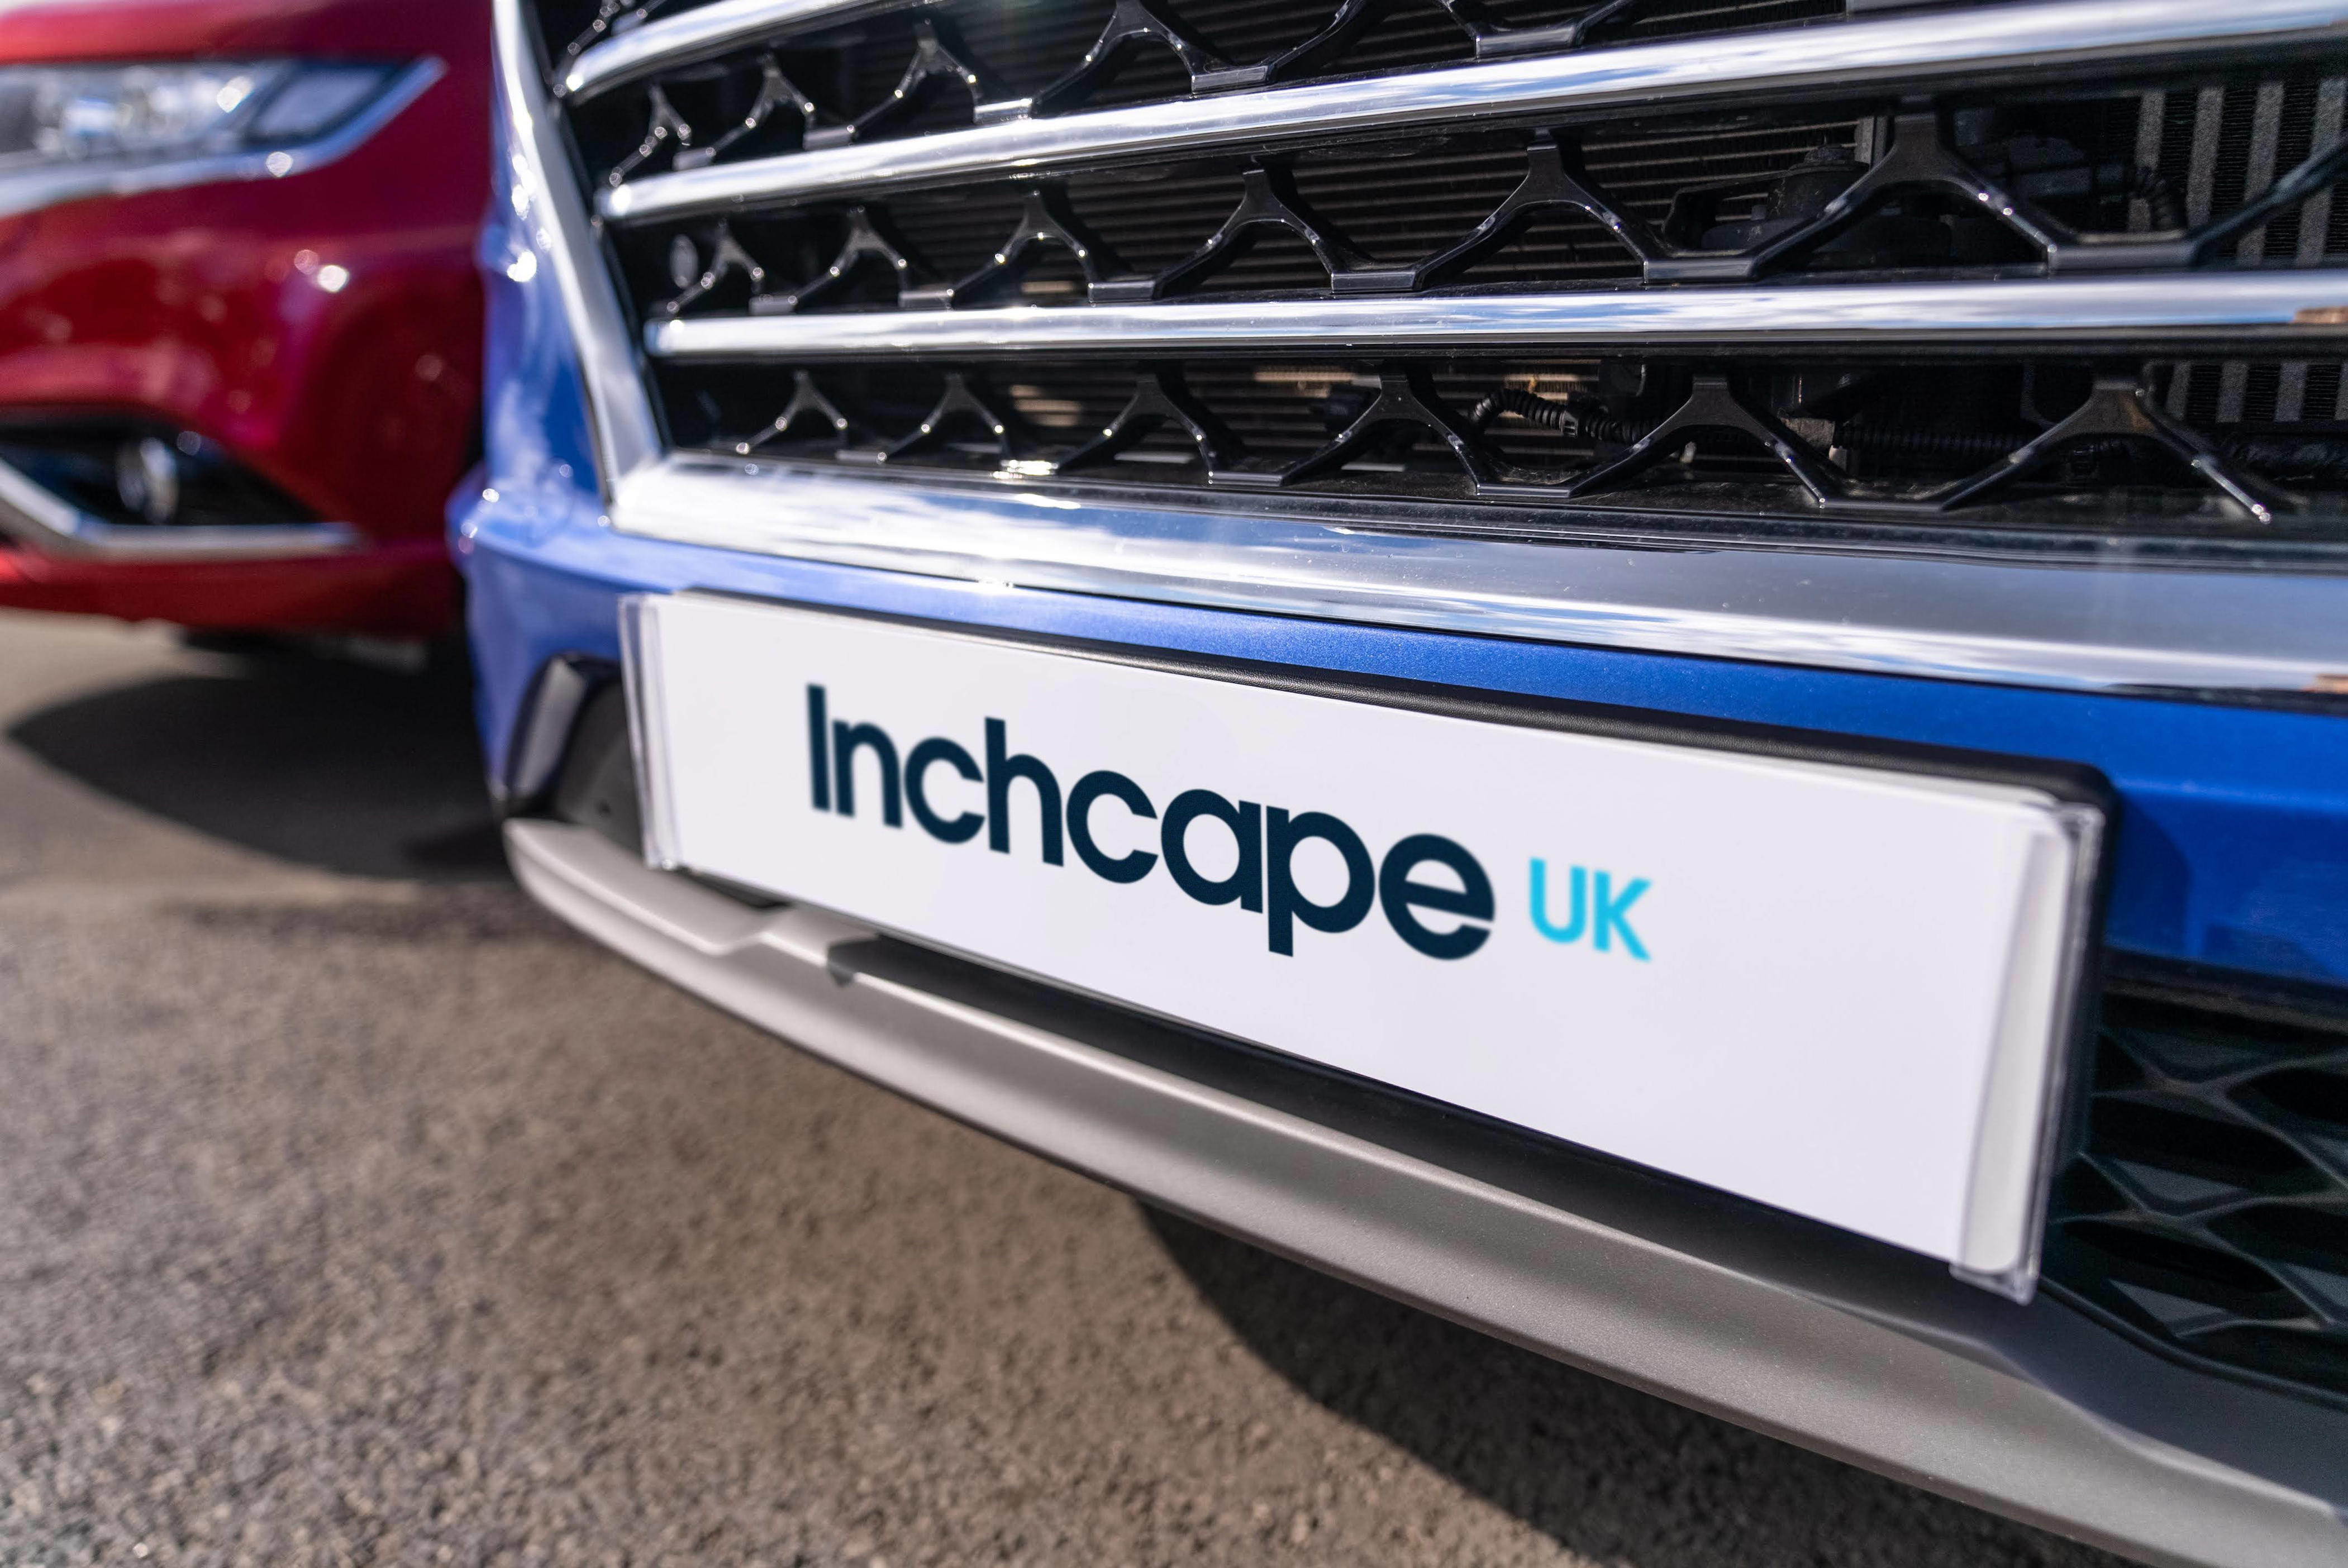 inchcape to sell uk car dealership business for £346m